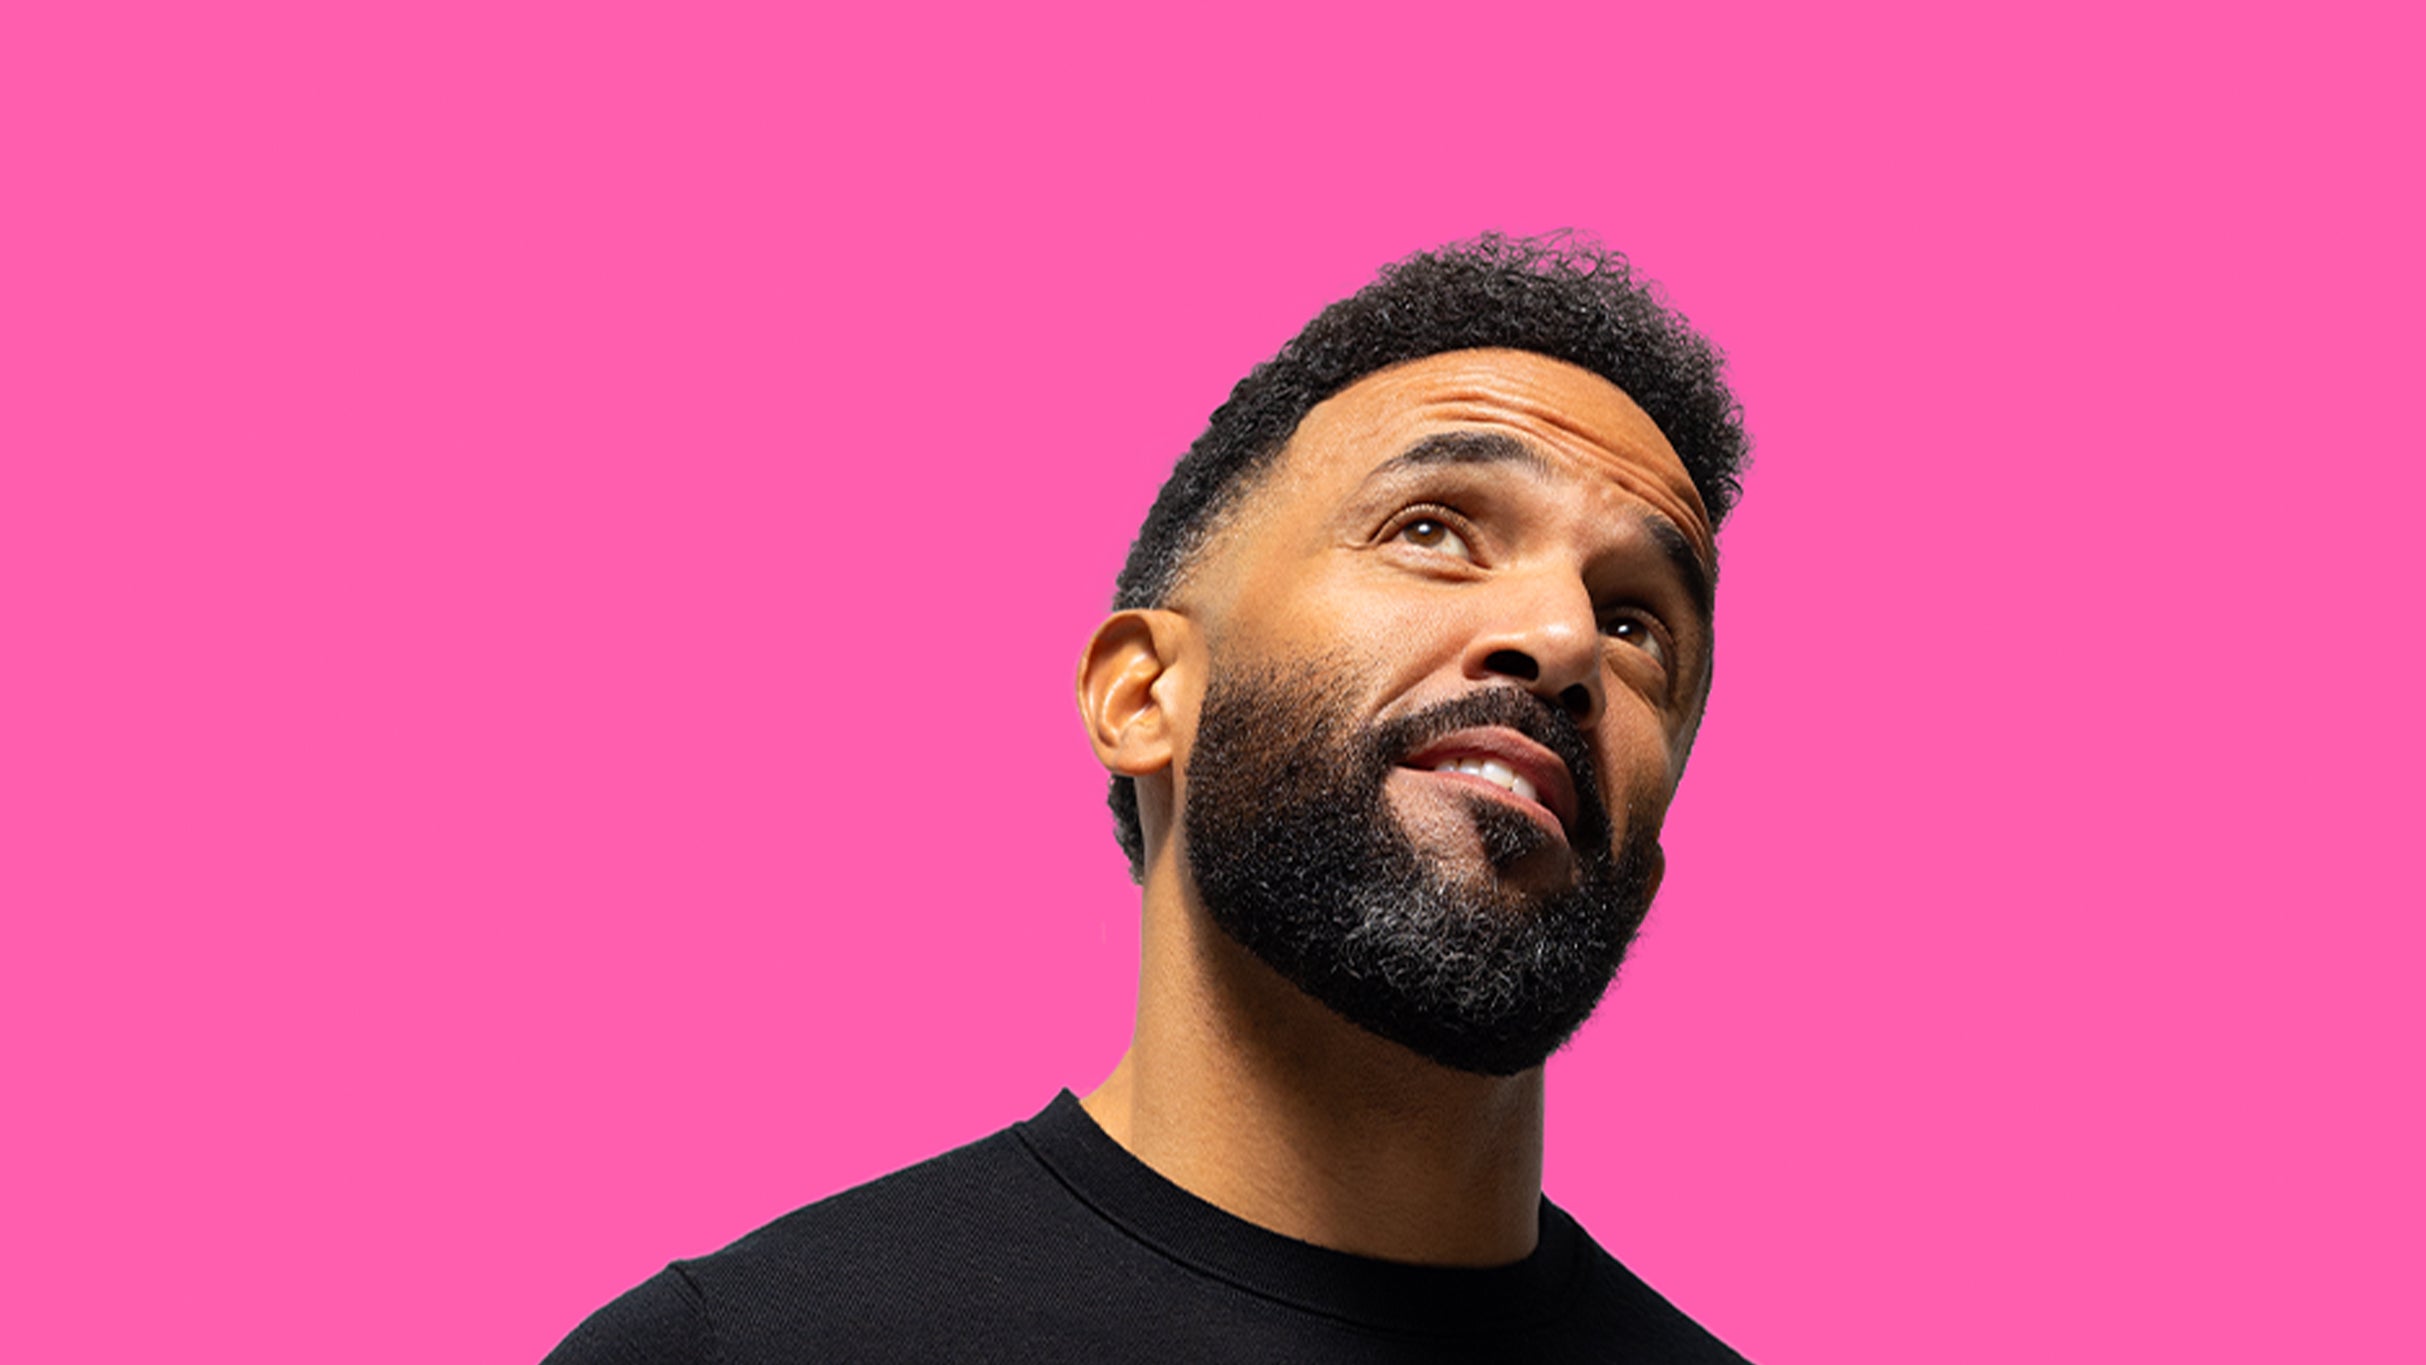 Craig David: Commitment Tour in Newcastle Upon Tyne promo photo for Spotify presale offer code